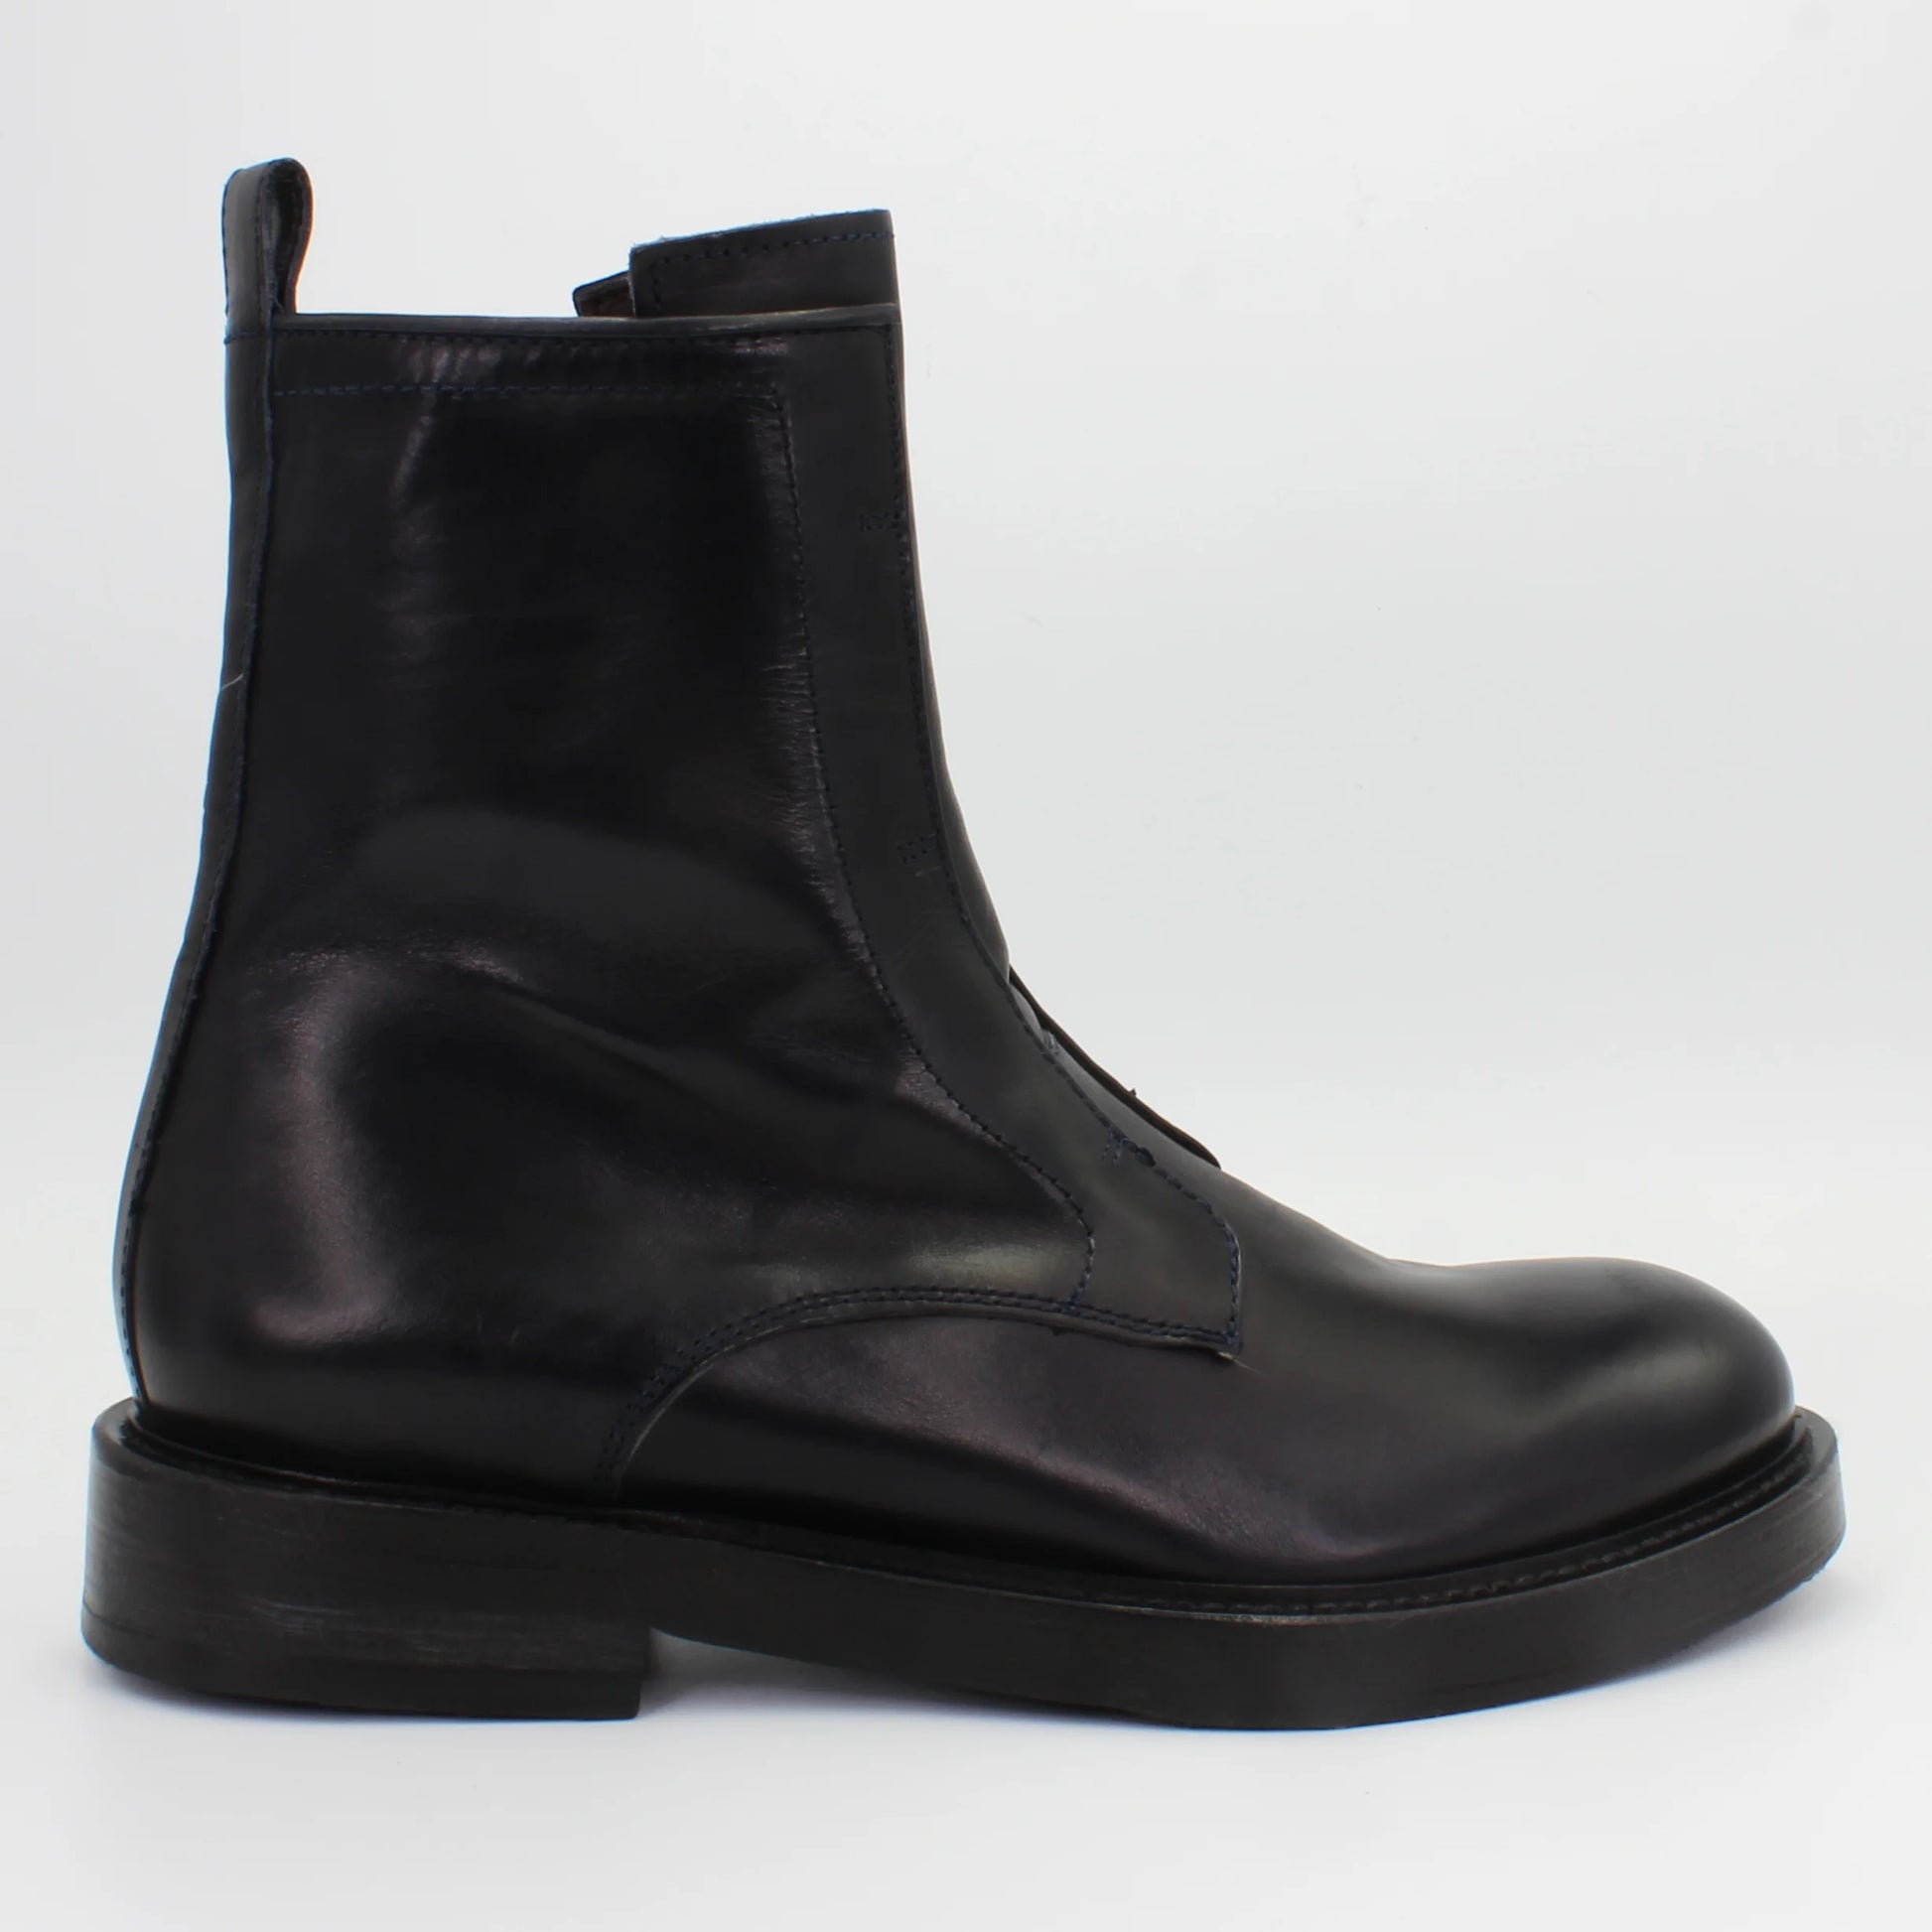 Shop Handmade Italian Leather Boot in Blu (JP35773/23) or browse our range of hand-made Italian boots for women in leather or suede in-store at Aliverti Cape Town, or shop online. We deliver in South Africa & offer multiple payment plans as well as accept multiple safe & secure payment methods.